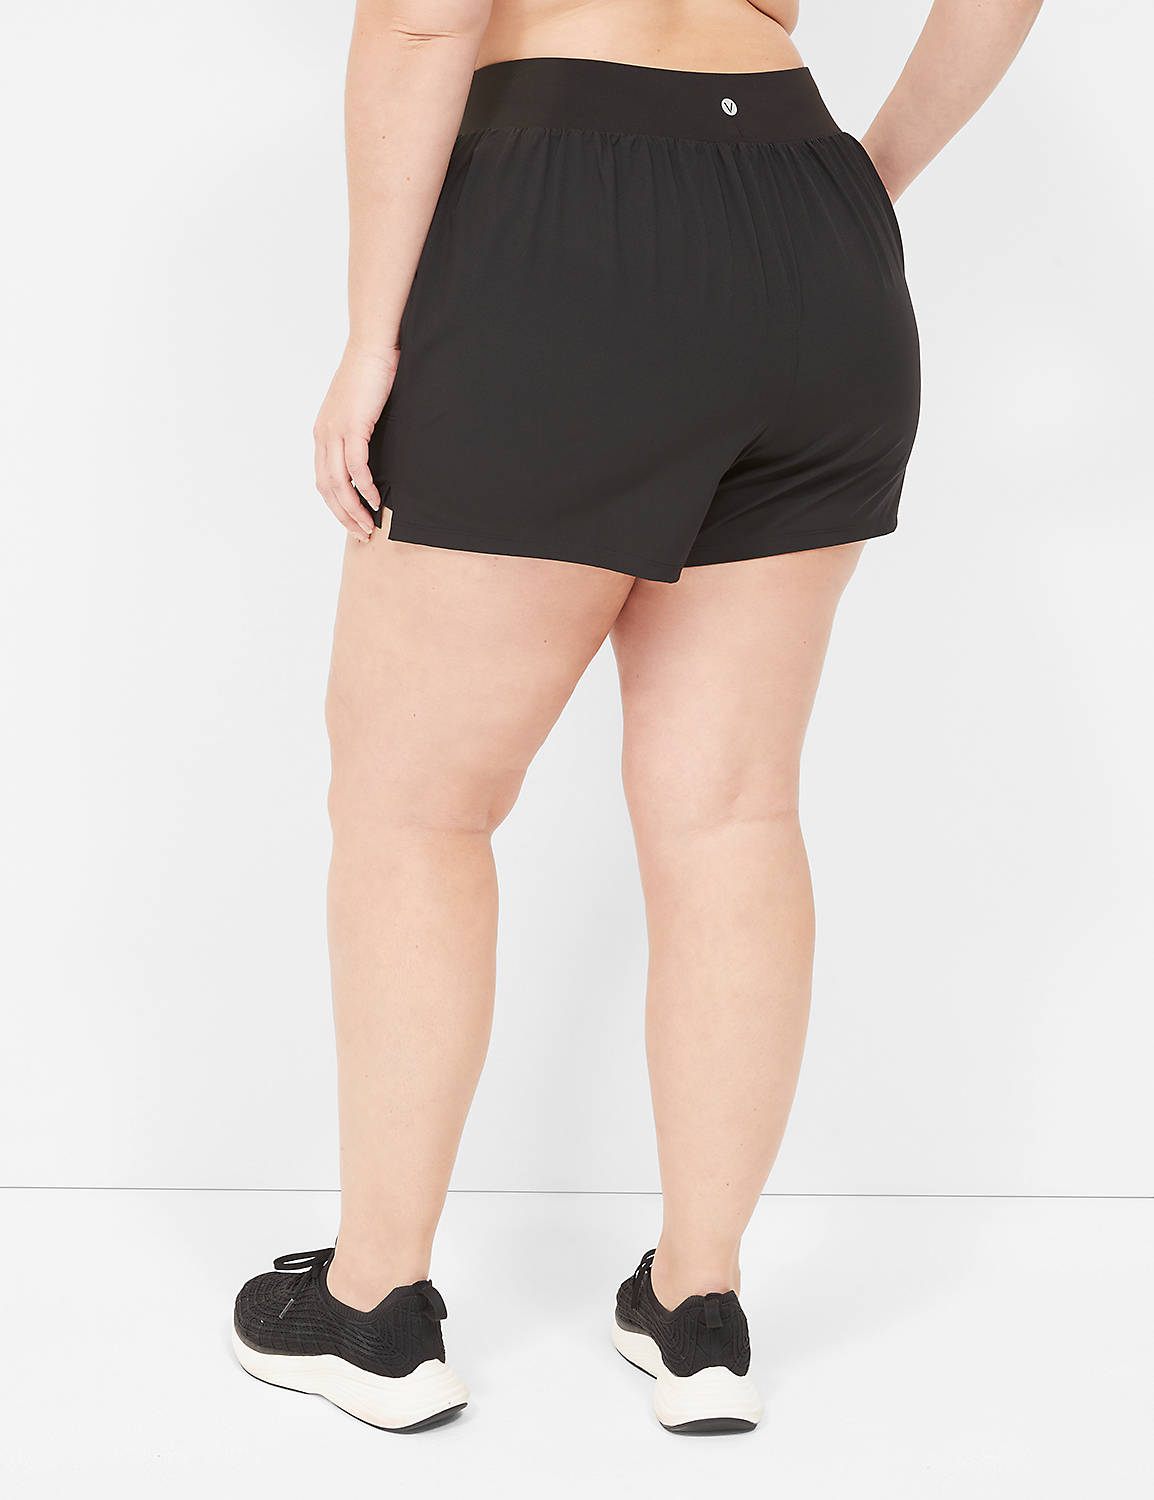 LIVI Mid Rise Stretch Woven Short S Product Image 2